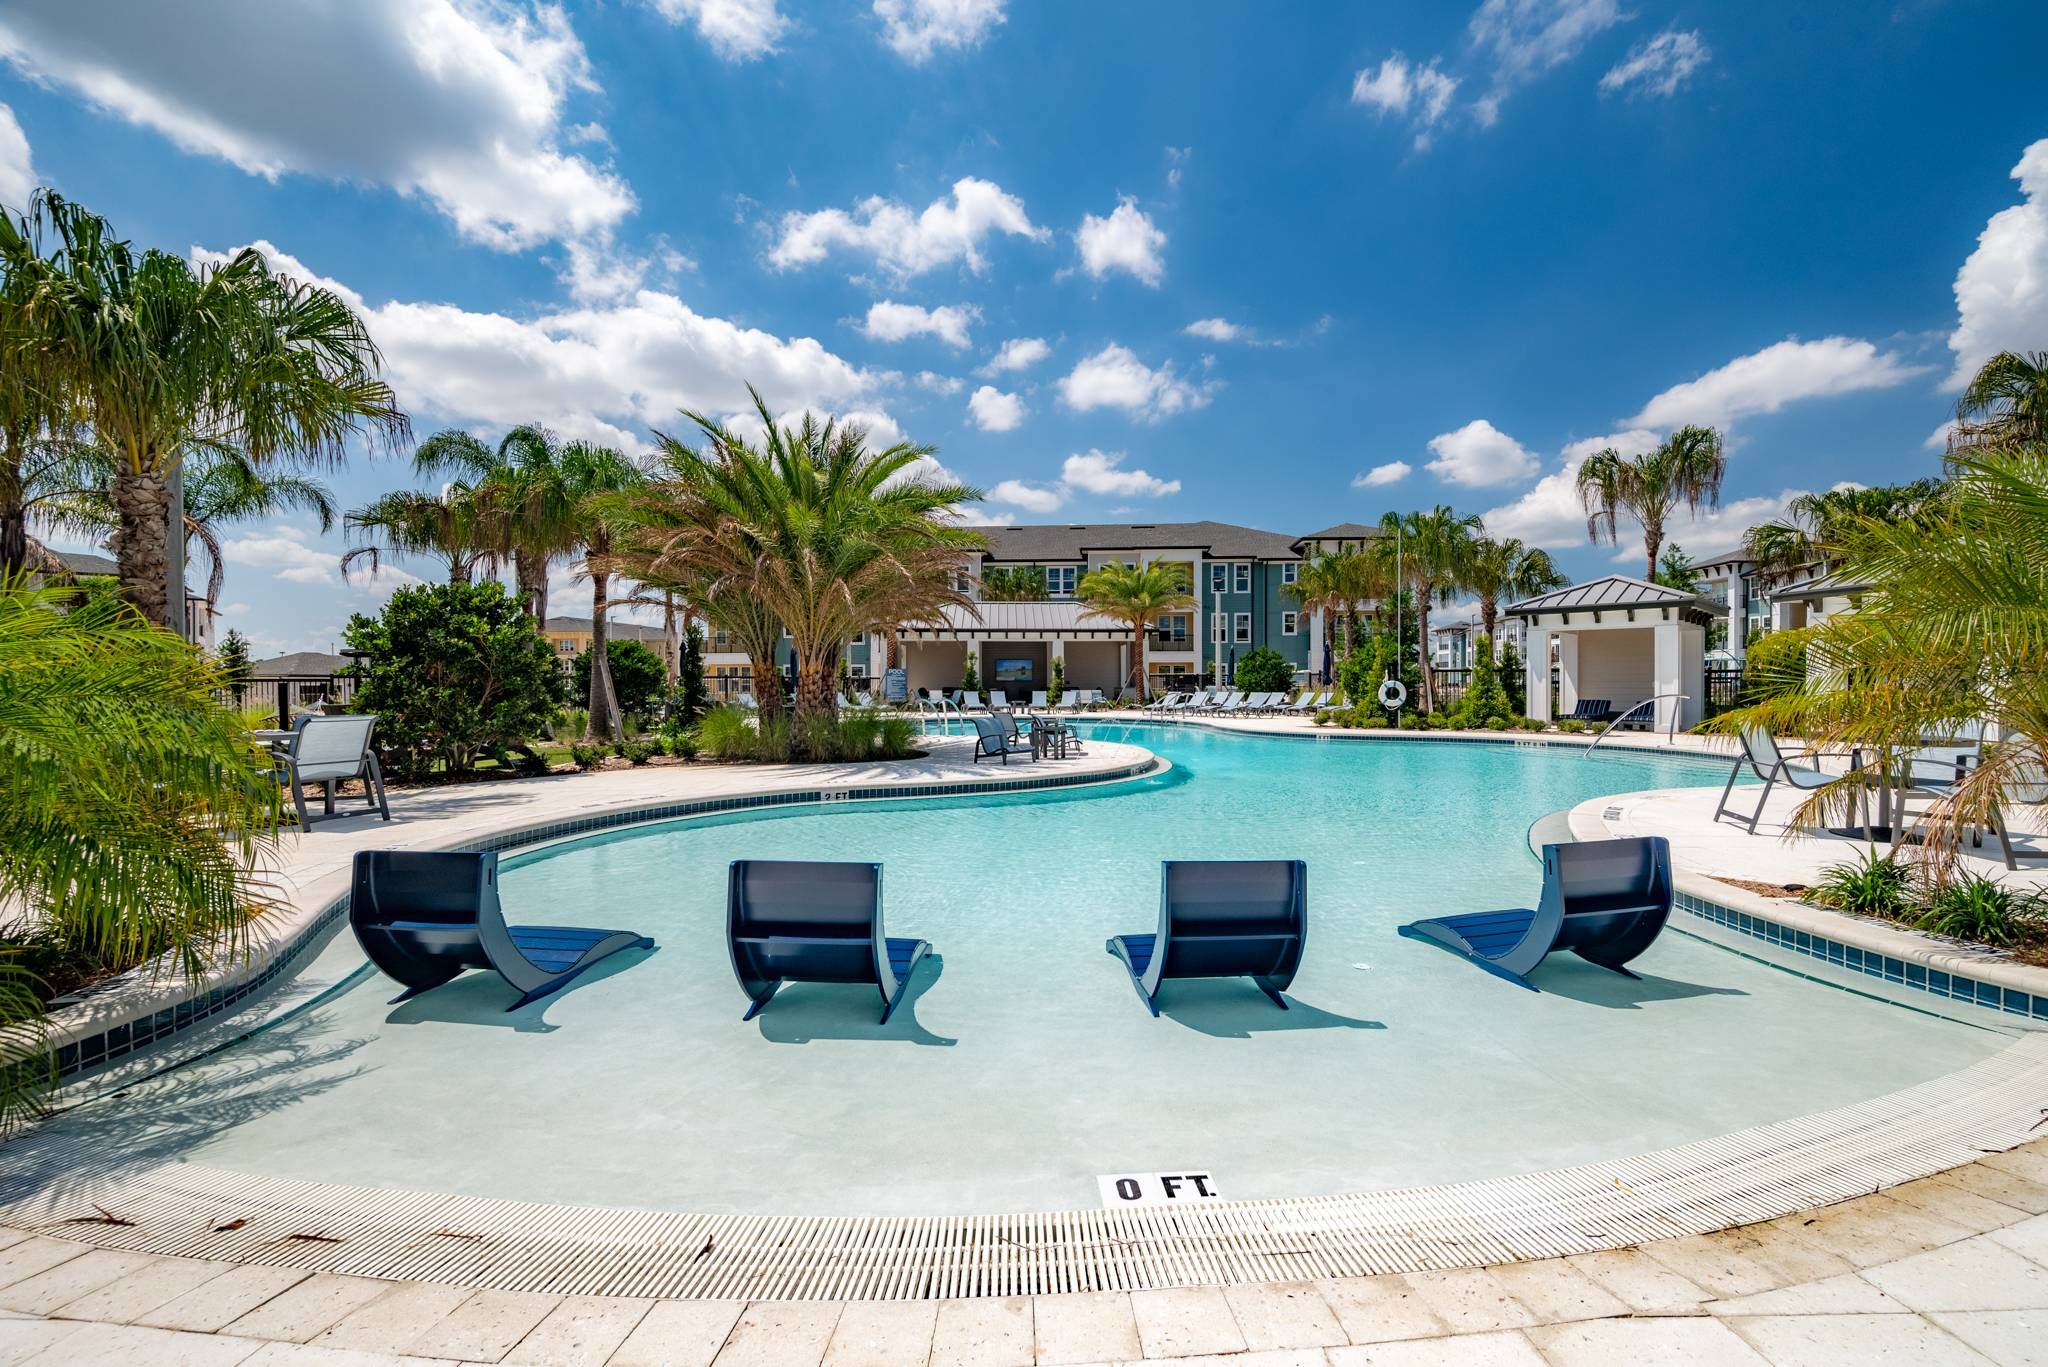 An inviting zero-entry swimming pool with lounge chairs partially submerged in the water, surrounded by palm trees and apartment buildings at Alta at Horizon West.